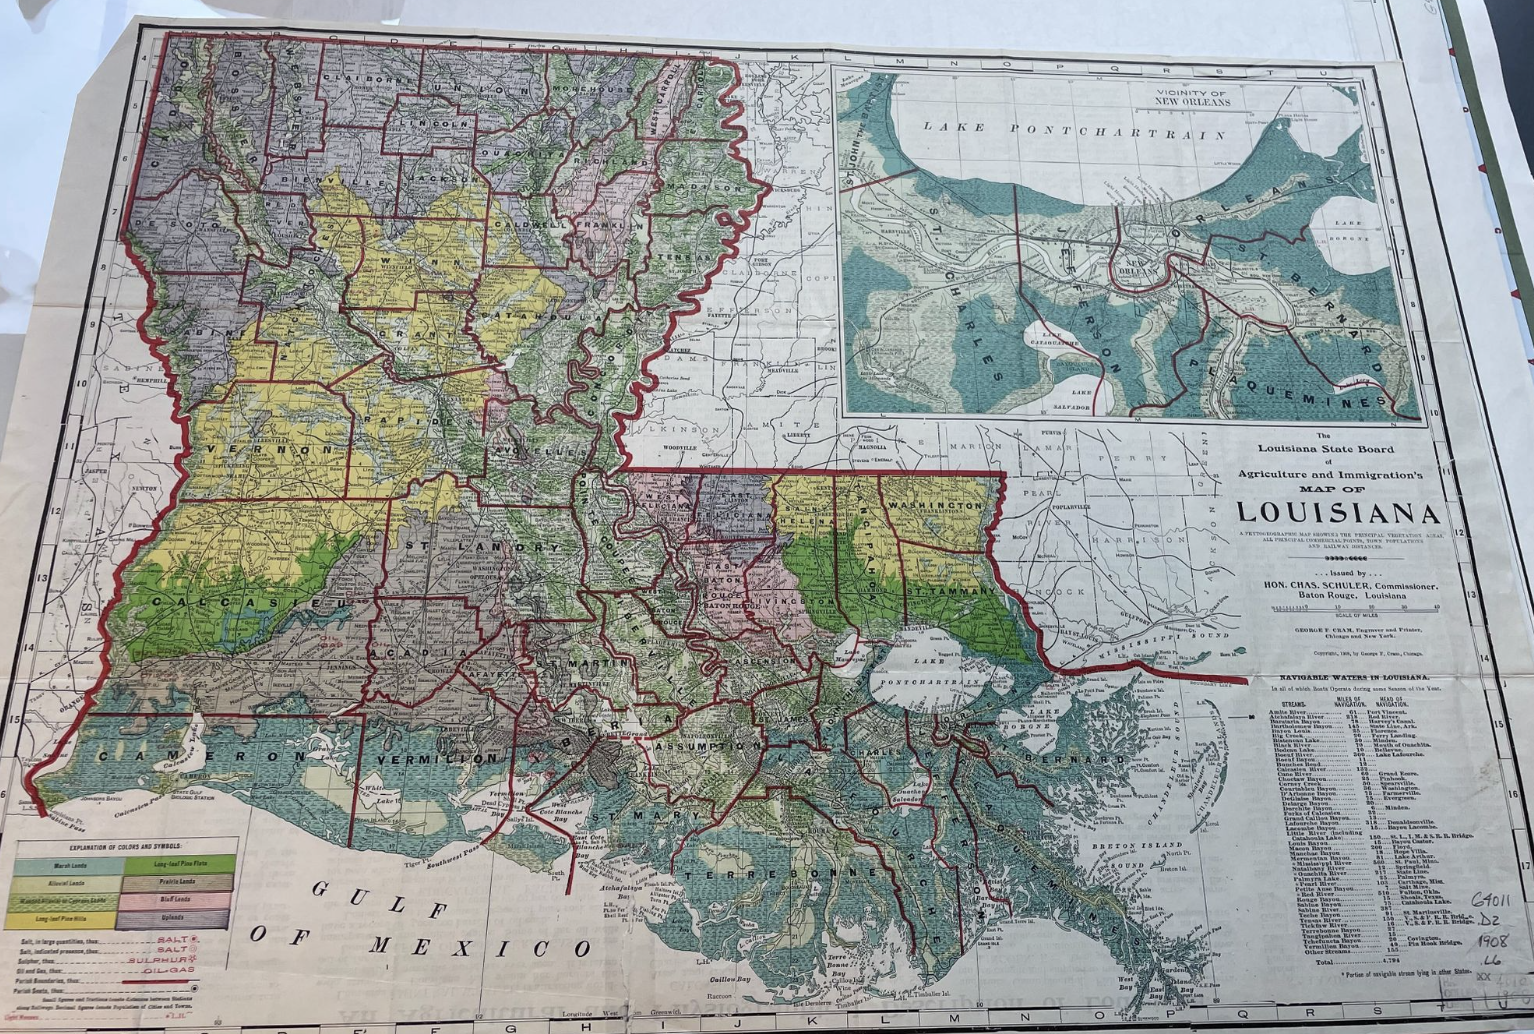 Photograph of a 1909 map of land use in New Orleans